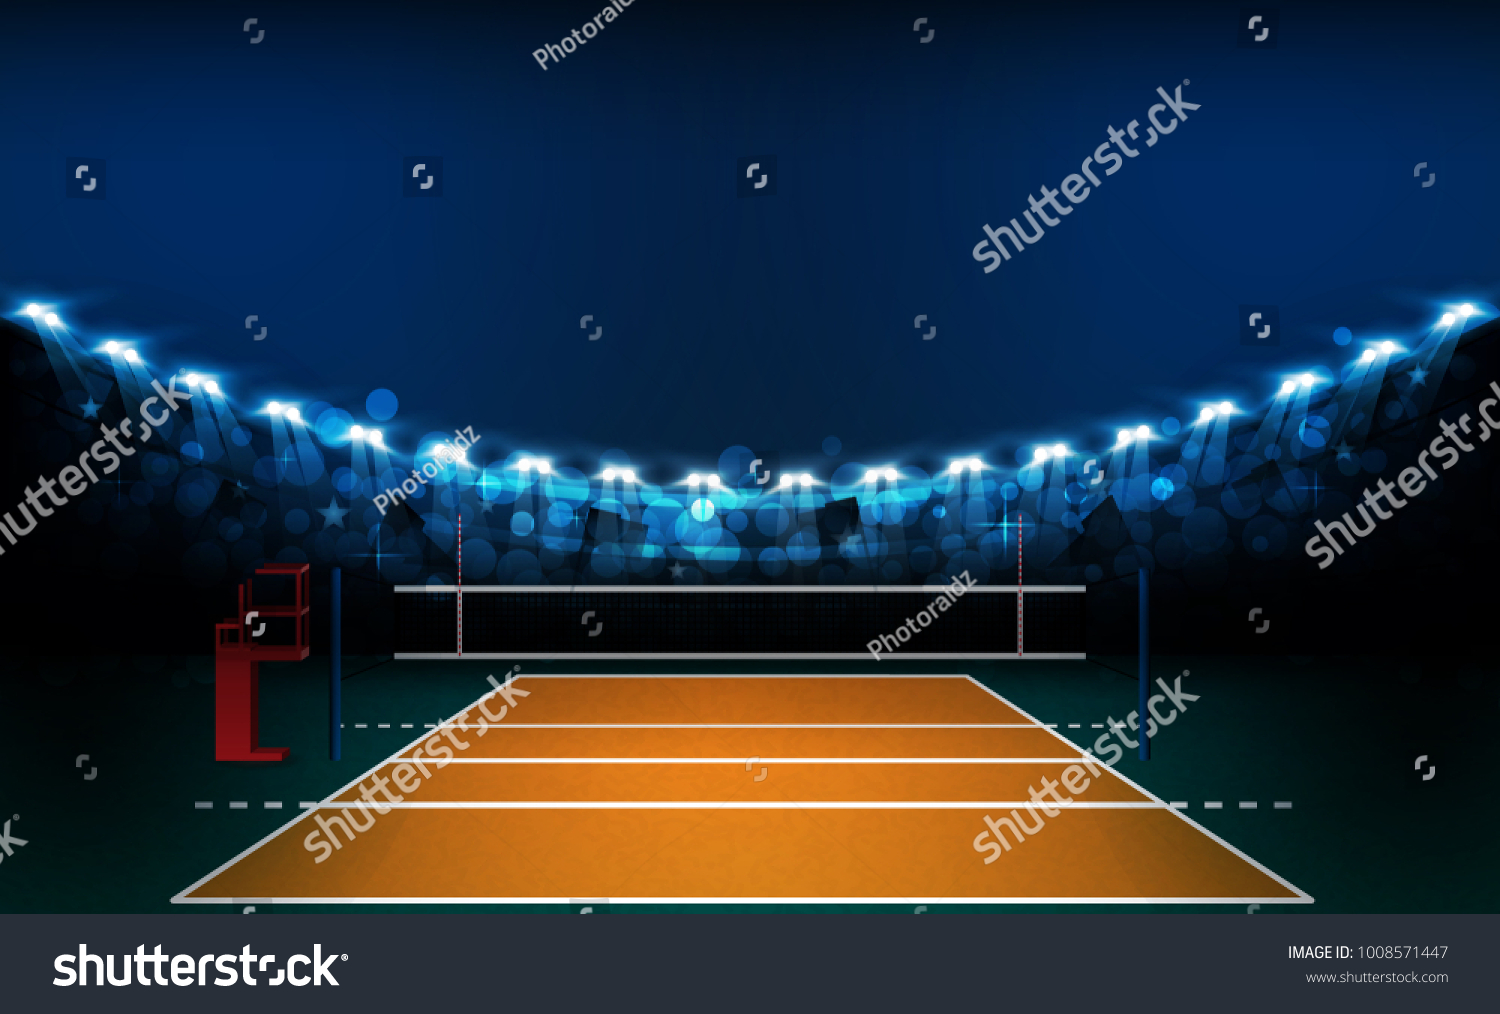 Volleyball Court Arena Field Bright Stadium Stock Vector (Royalty Free ...